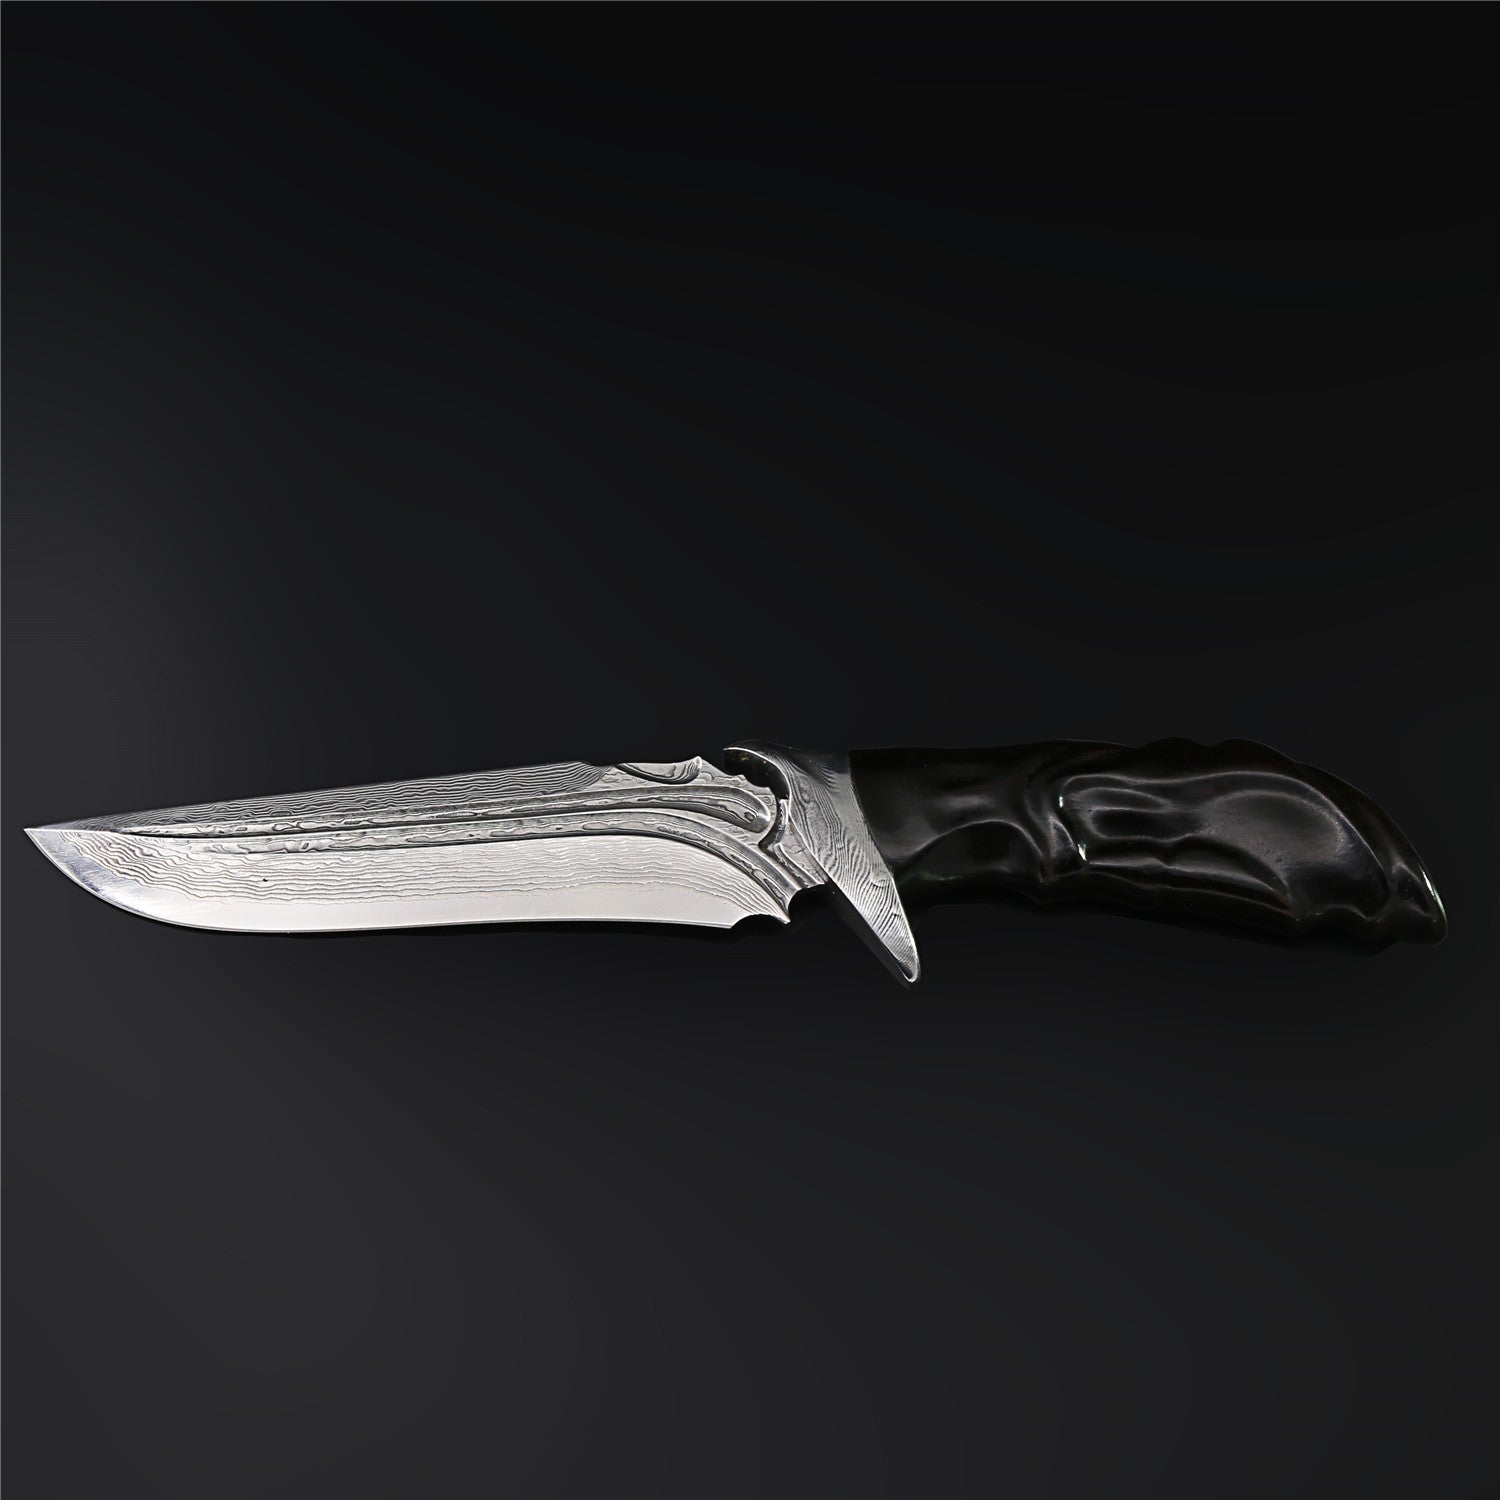 The Zither Damascus Steel Fixed Blade